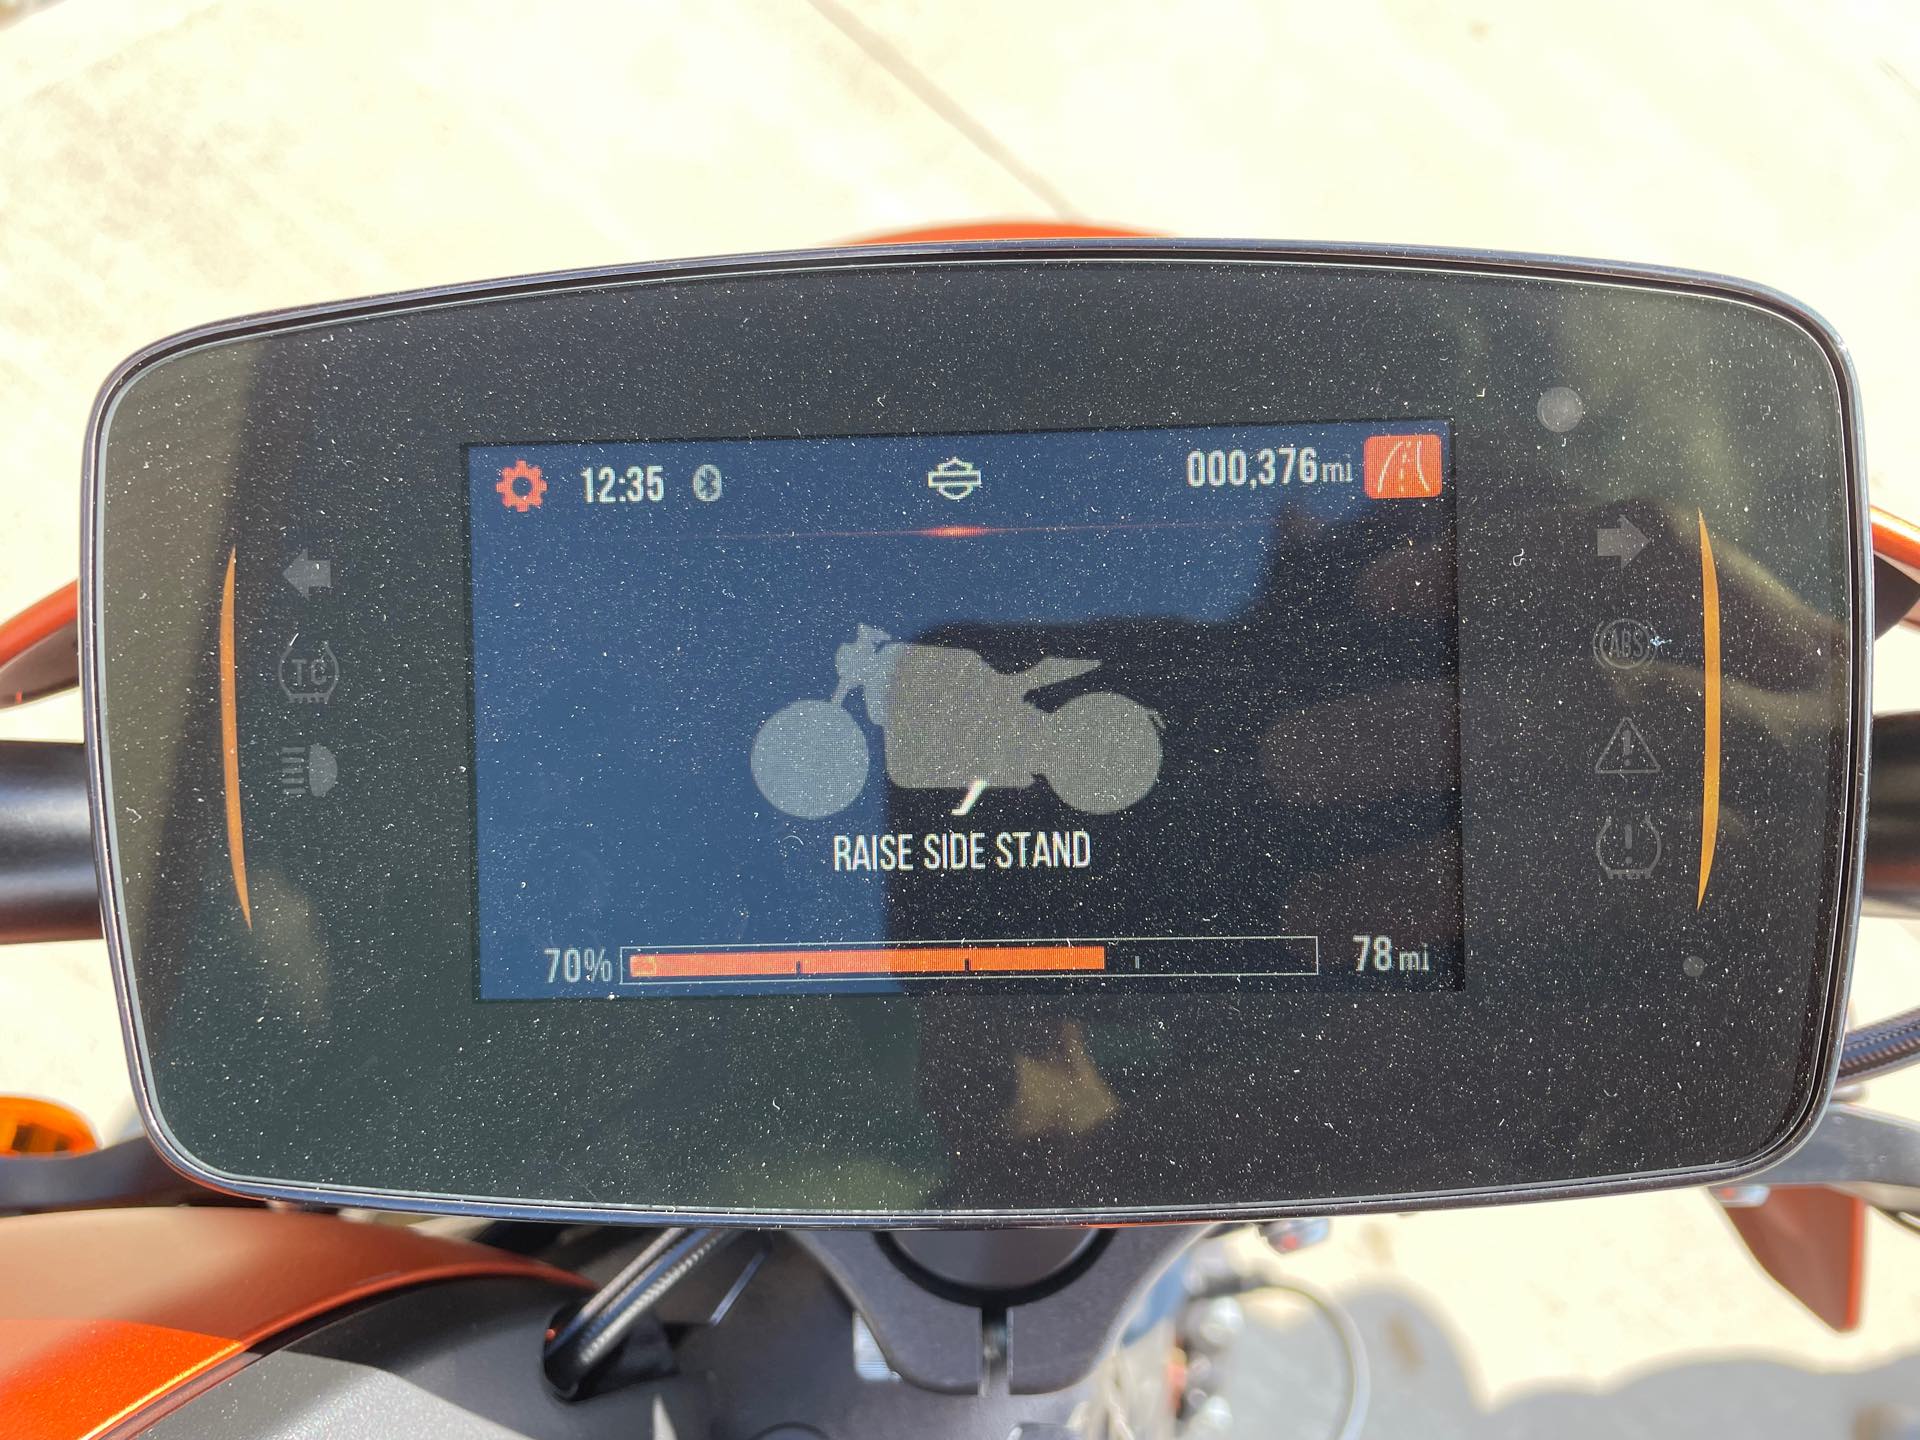 2020 Harley-Davidson Electric LiveWire at Arkport Cycles